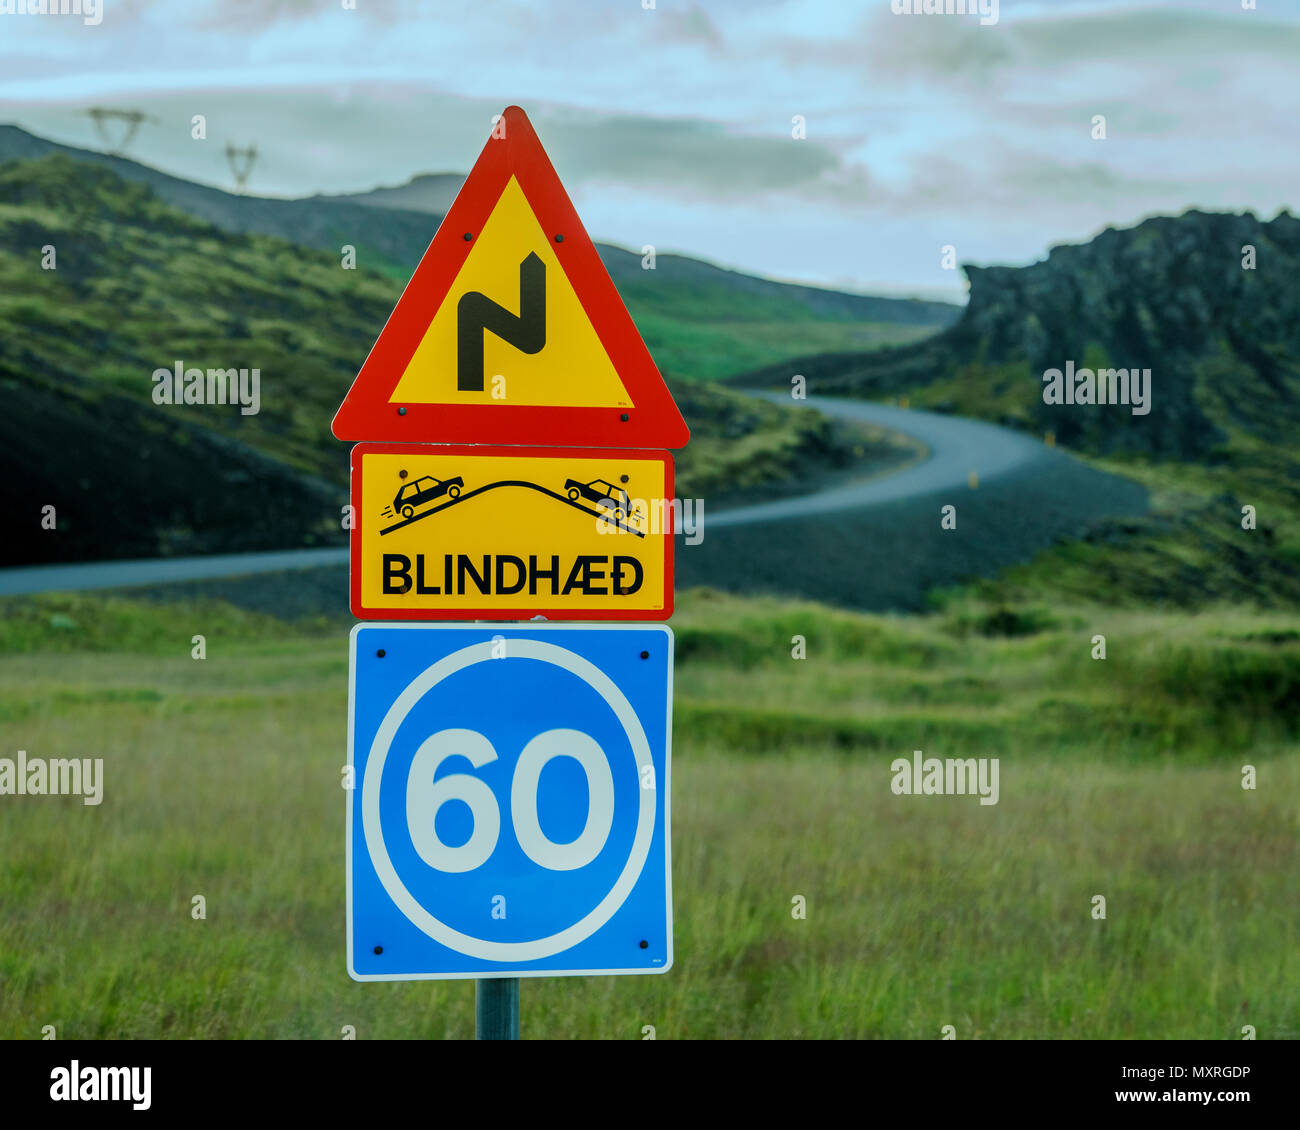 Warning traffic sign, Blind Curve Ahead, Speed 60, Iceland Stock Photo